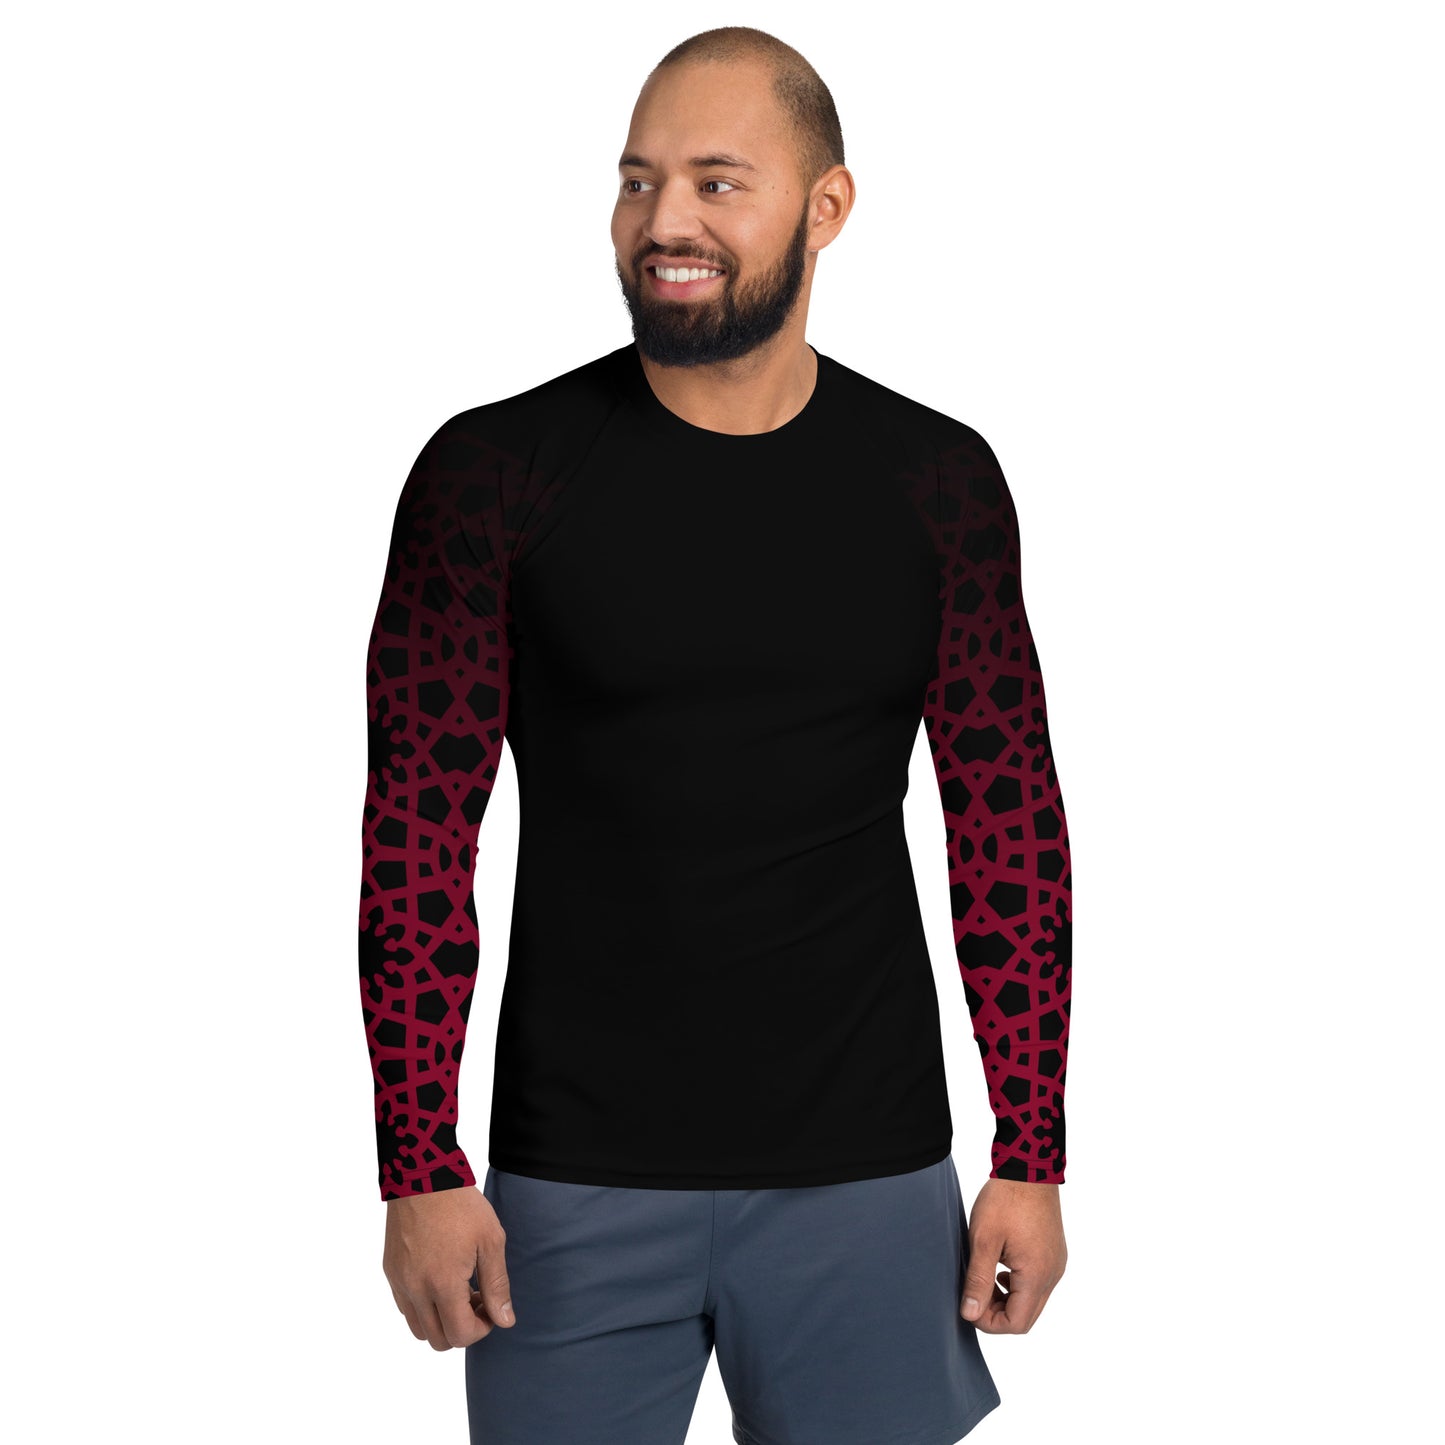 Men's Rash Guard - Geometric Ombre in Black and Red Sleeve